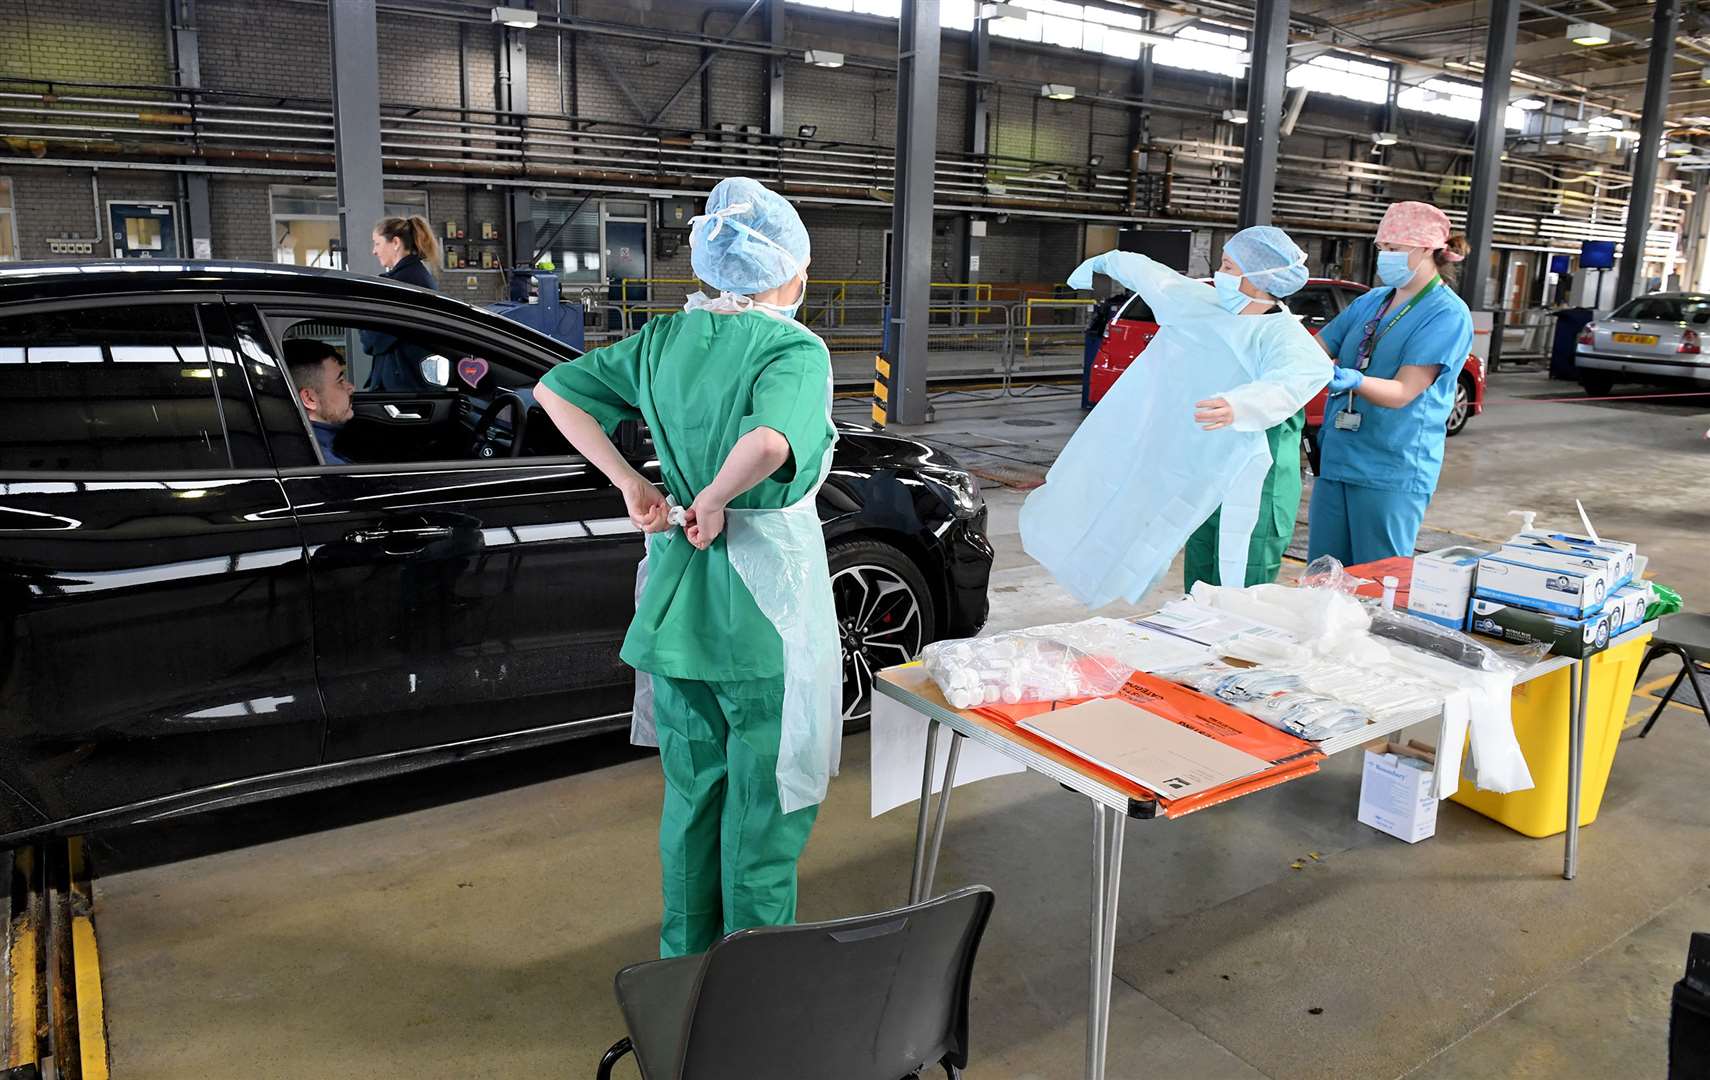 Health staff put on their PPE masks, gloves and gowns in Belfast (Justin Kernoghan/PA)